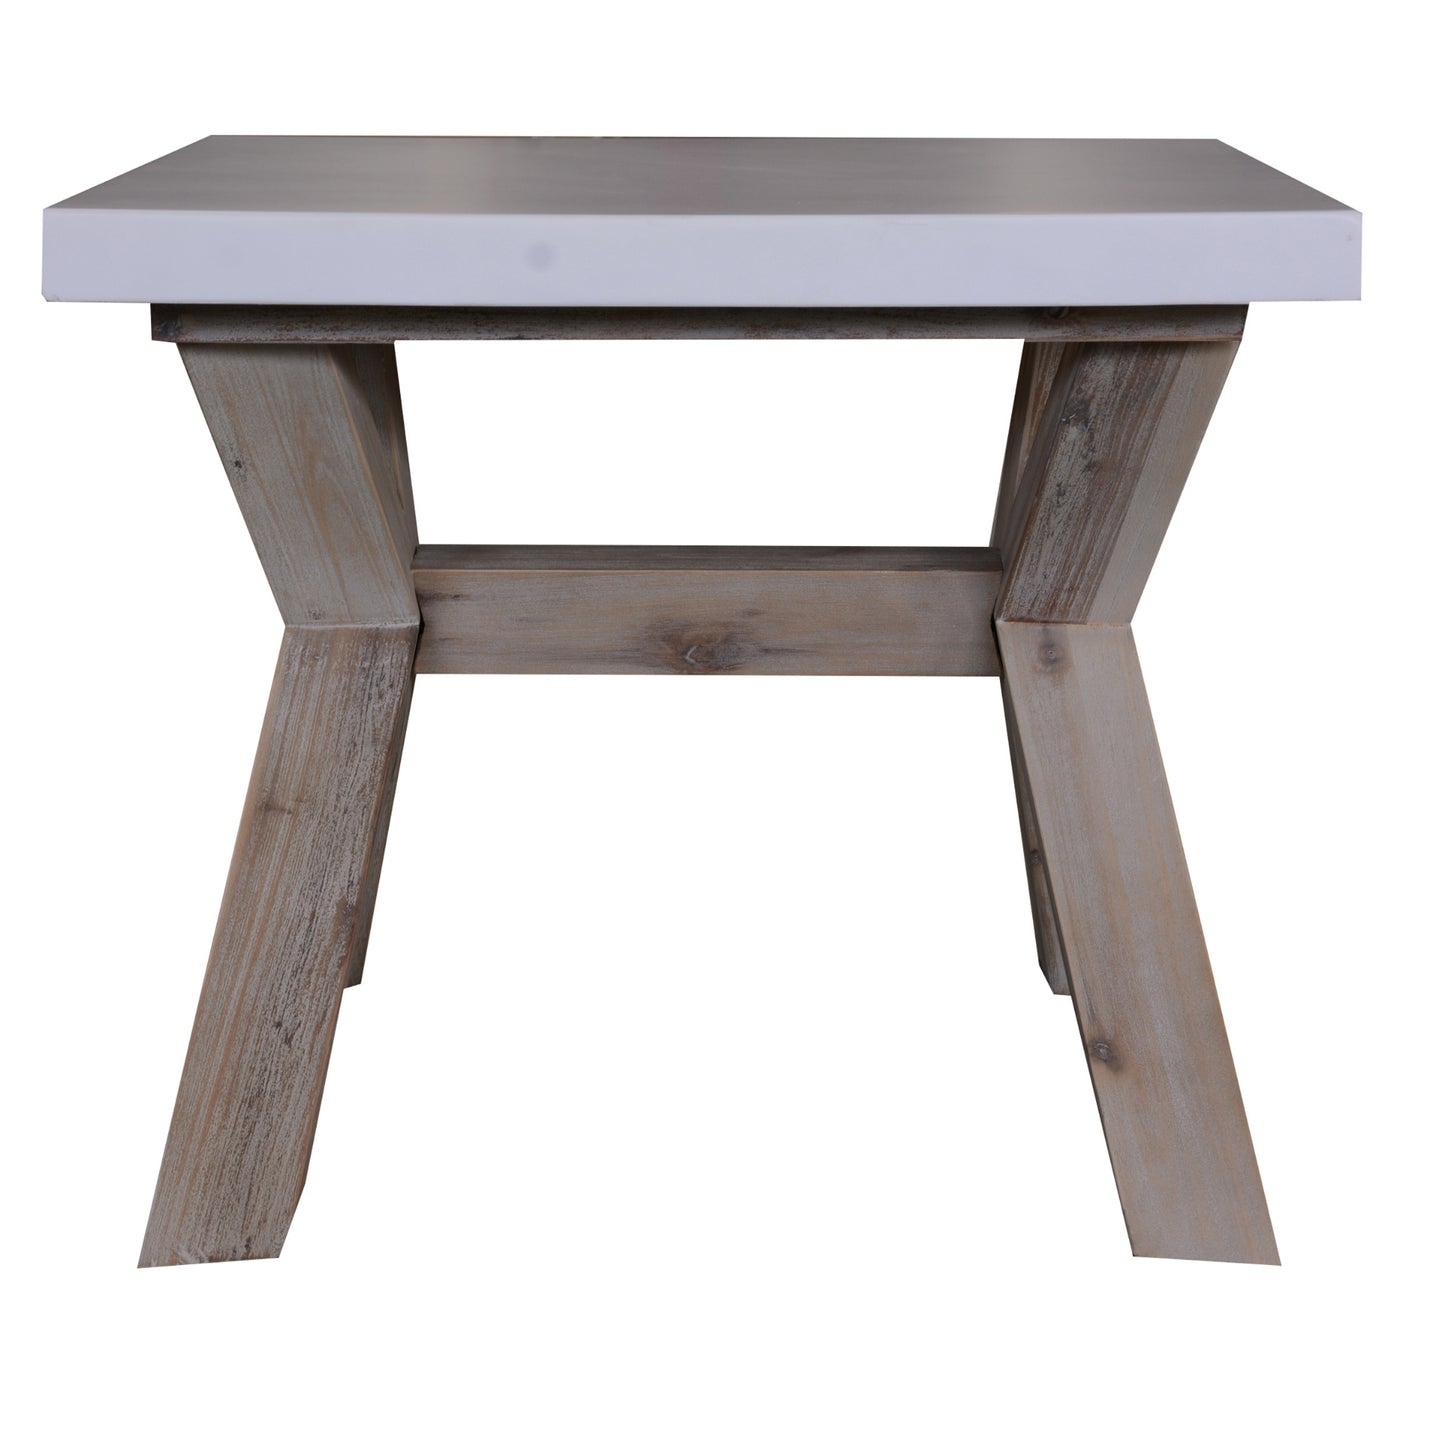 Stony 60cm Square Lamp Table with Concrete Top - White